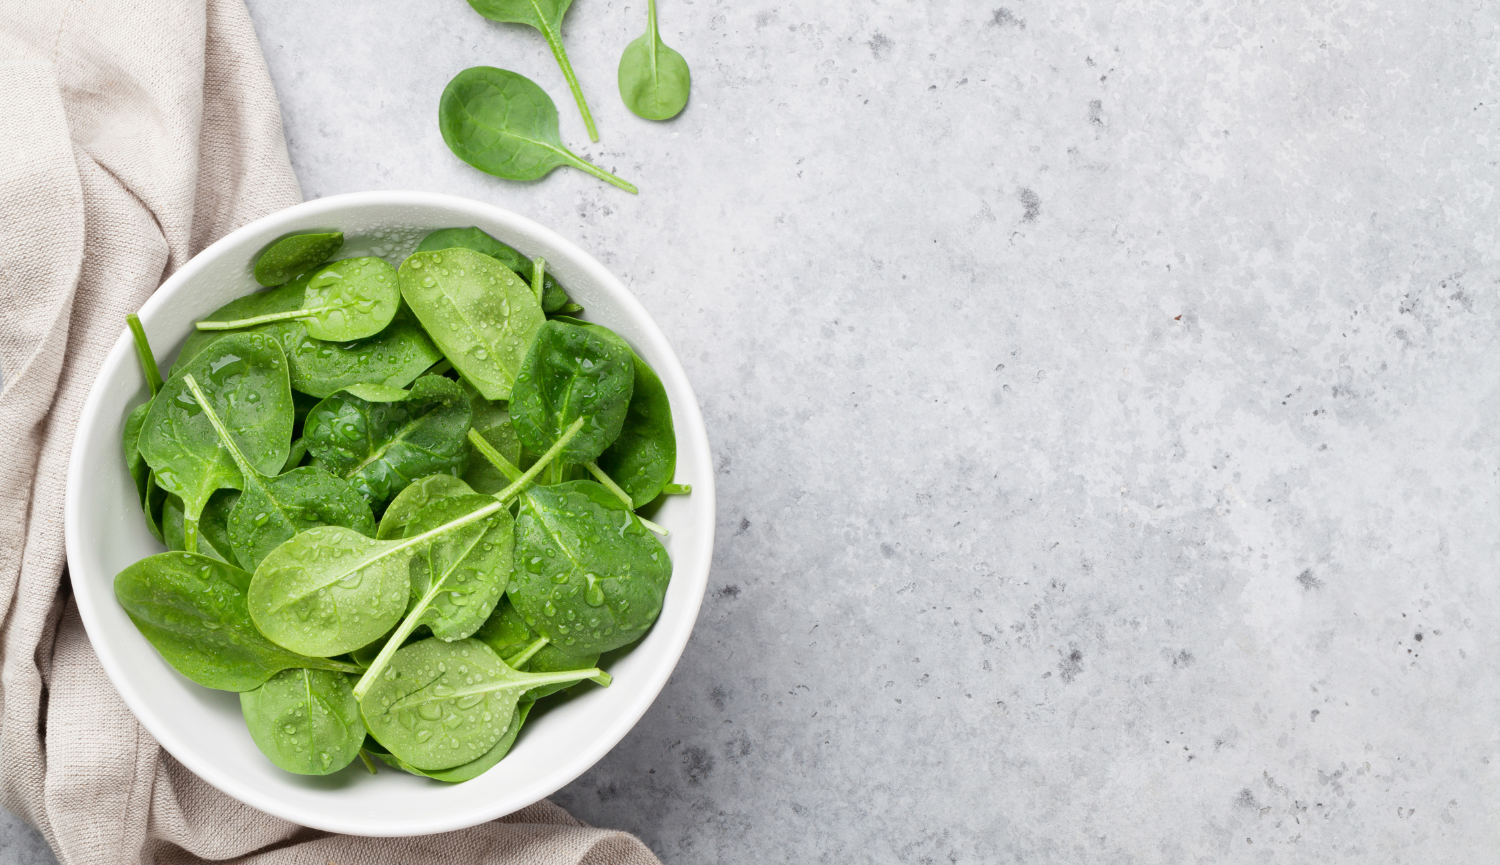 HEALTH BENEFITS OF SPINACH: A NUTRIENT-PACKED SUPERFOOD